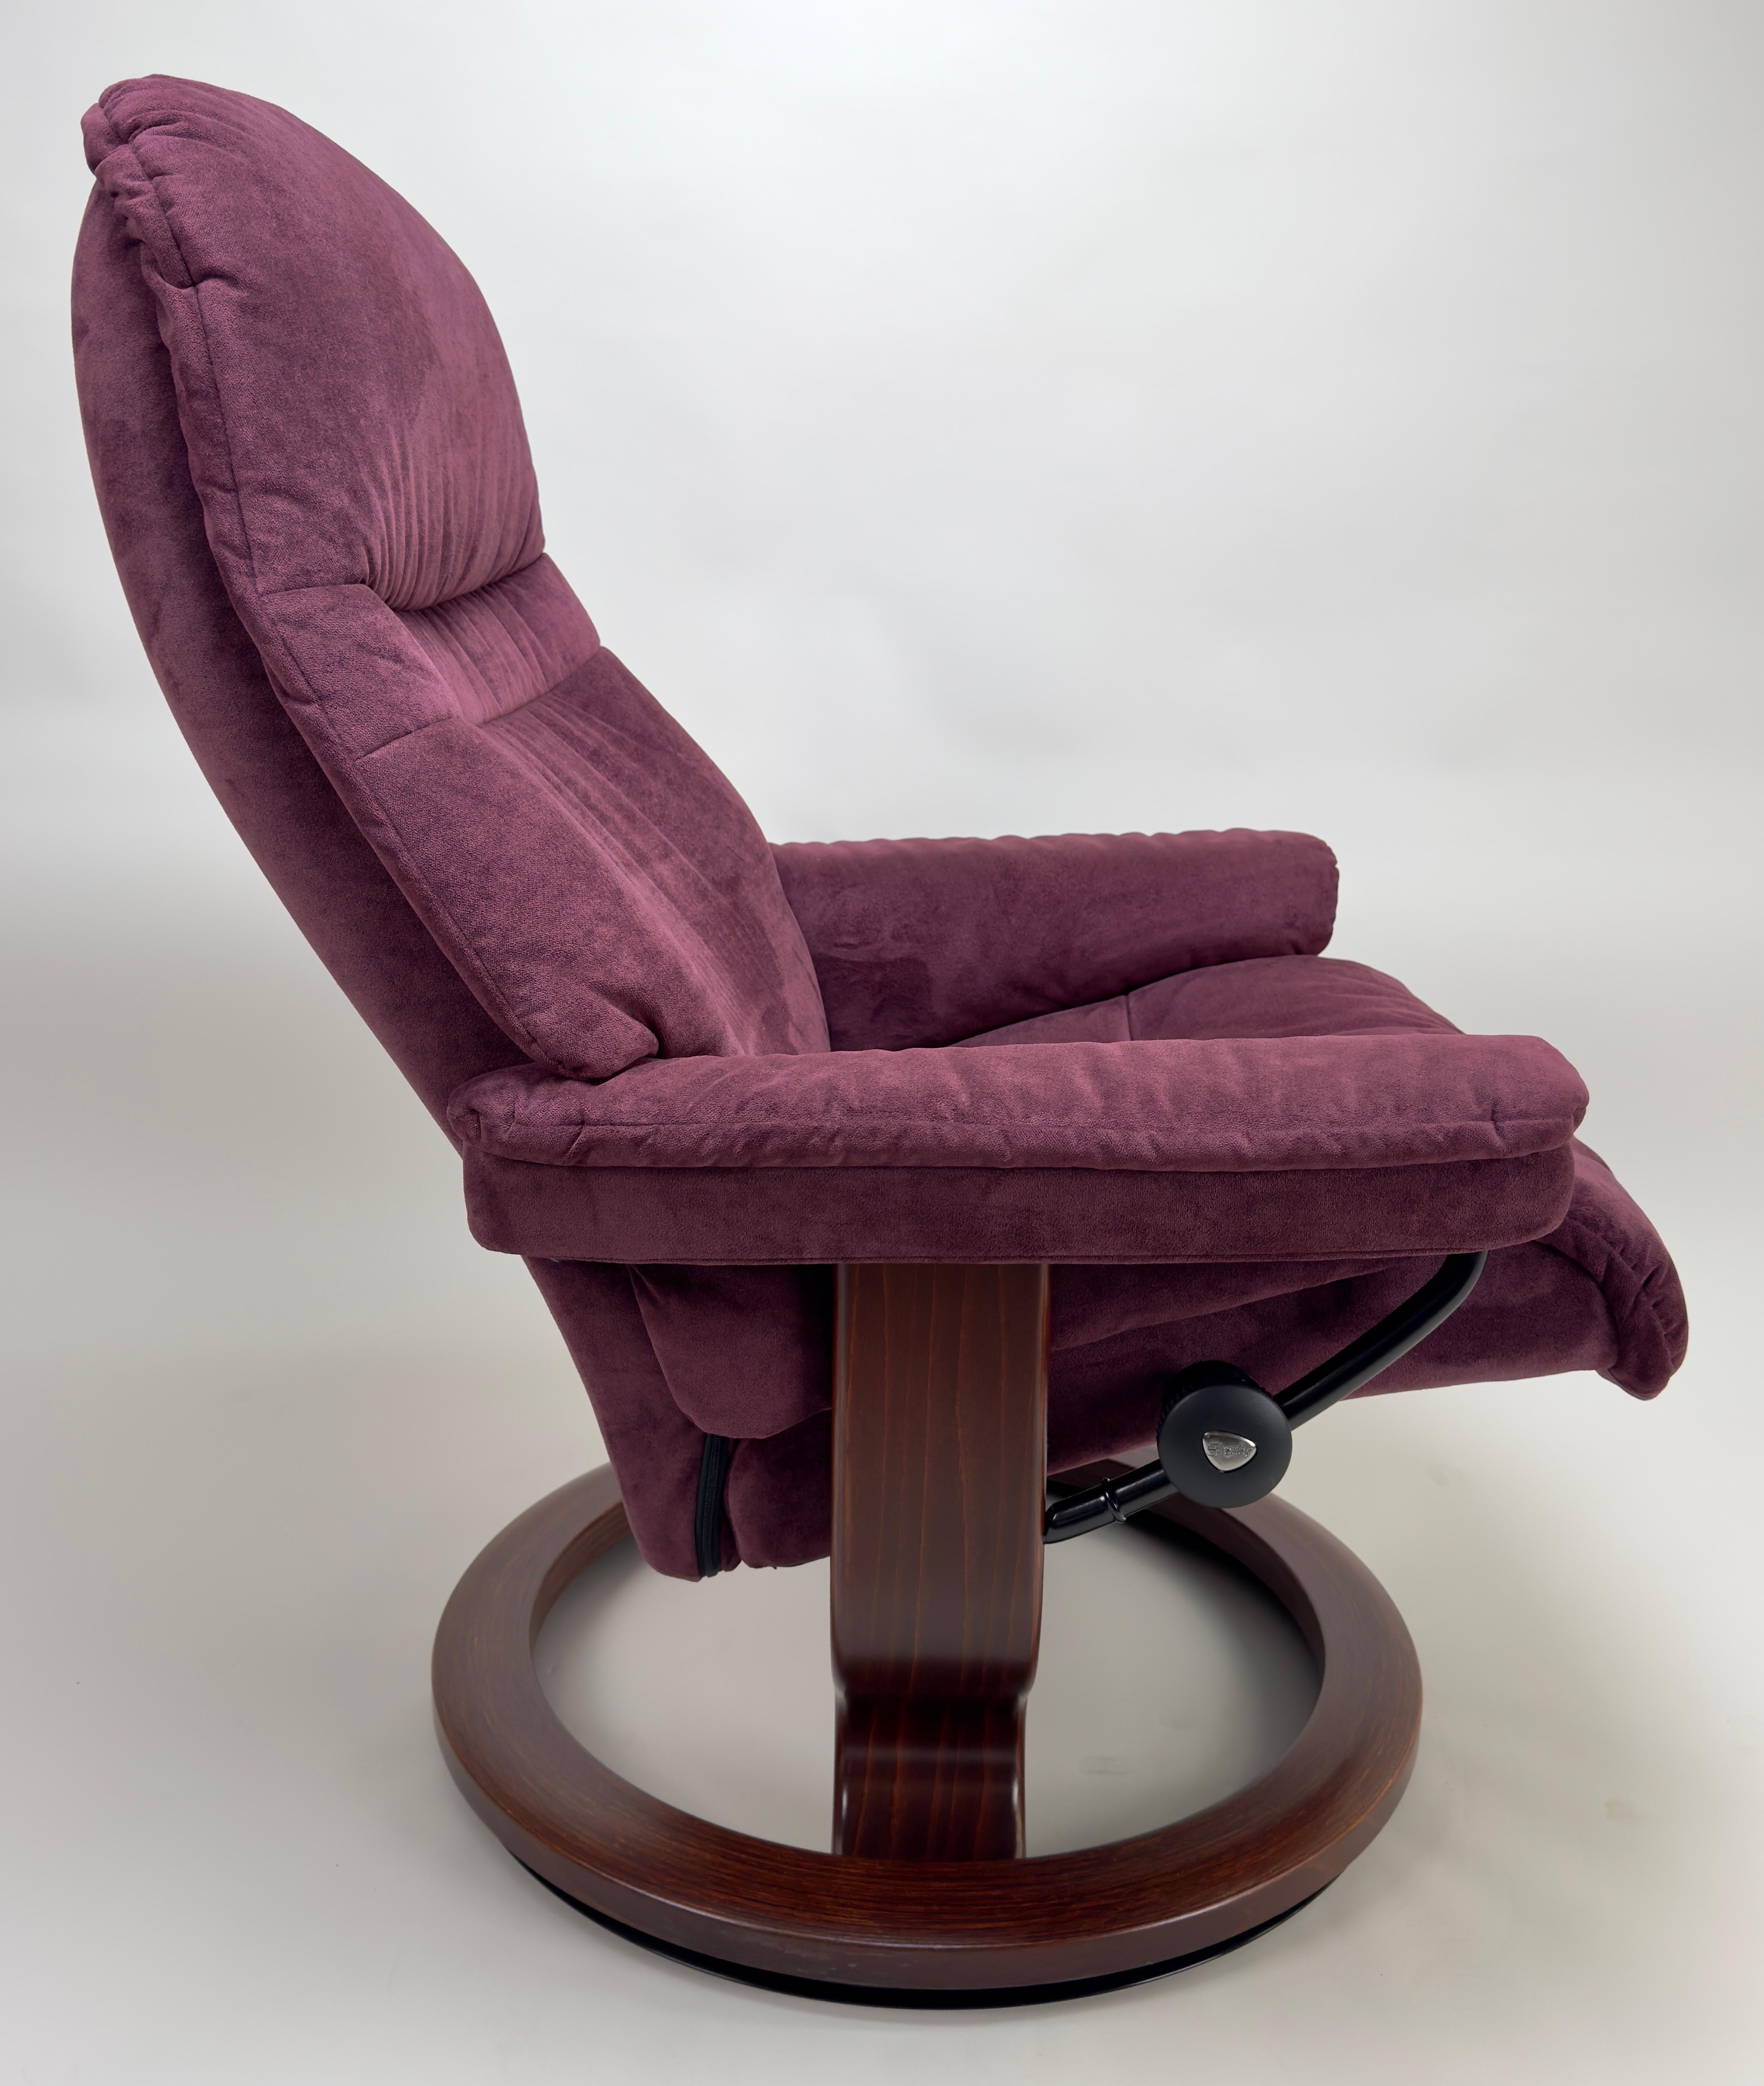 Scandinavian Ekornes Stressless Adjustable Purple Suede  Recliner & Ottoman  In Good Condition For Sale In Plainview, NY